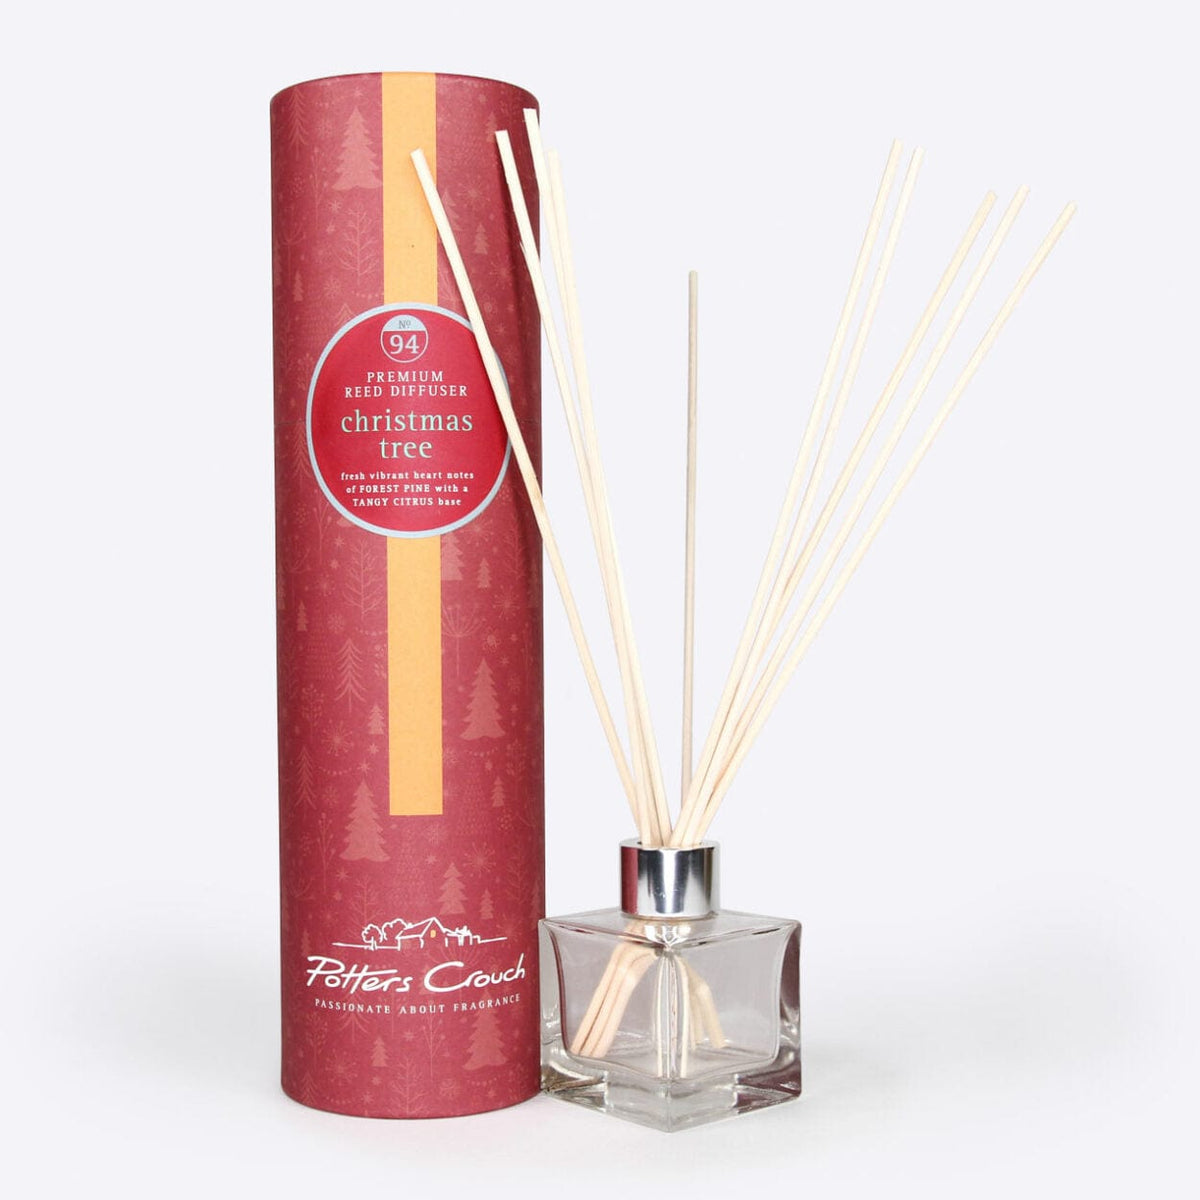 Potters Crouch Christmas Tree Scented Reed Diffuser